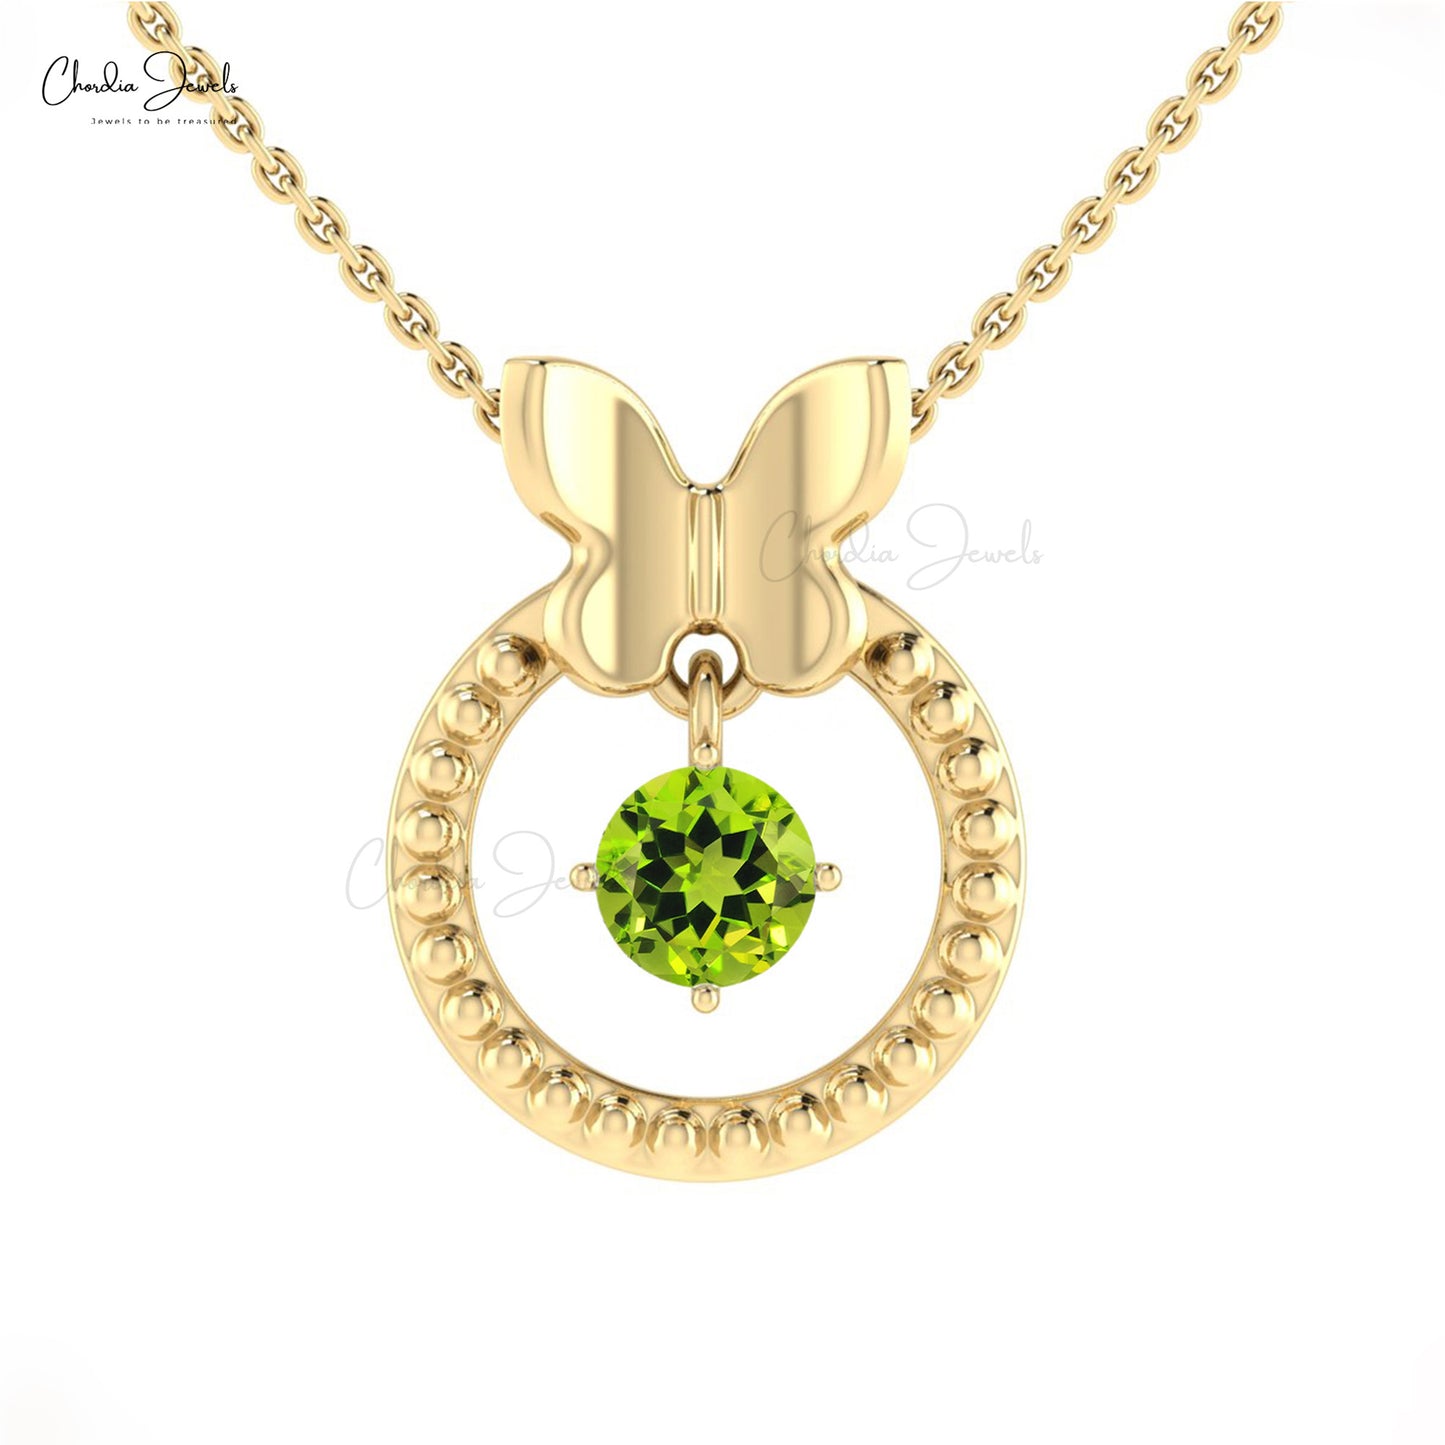 4mm Square Cut Natural Peridot Pendant For Women, 14k Solid Gold Gemst